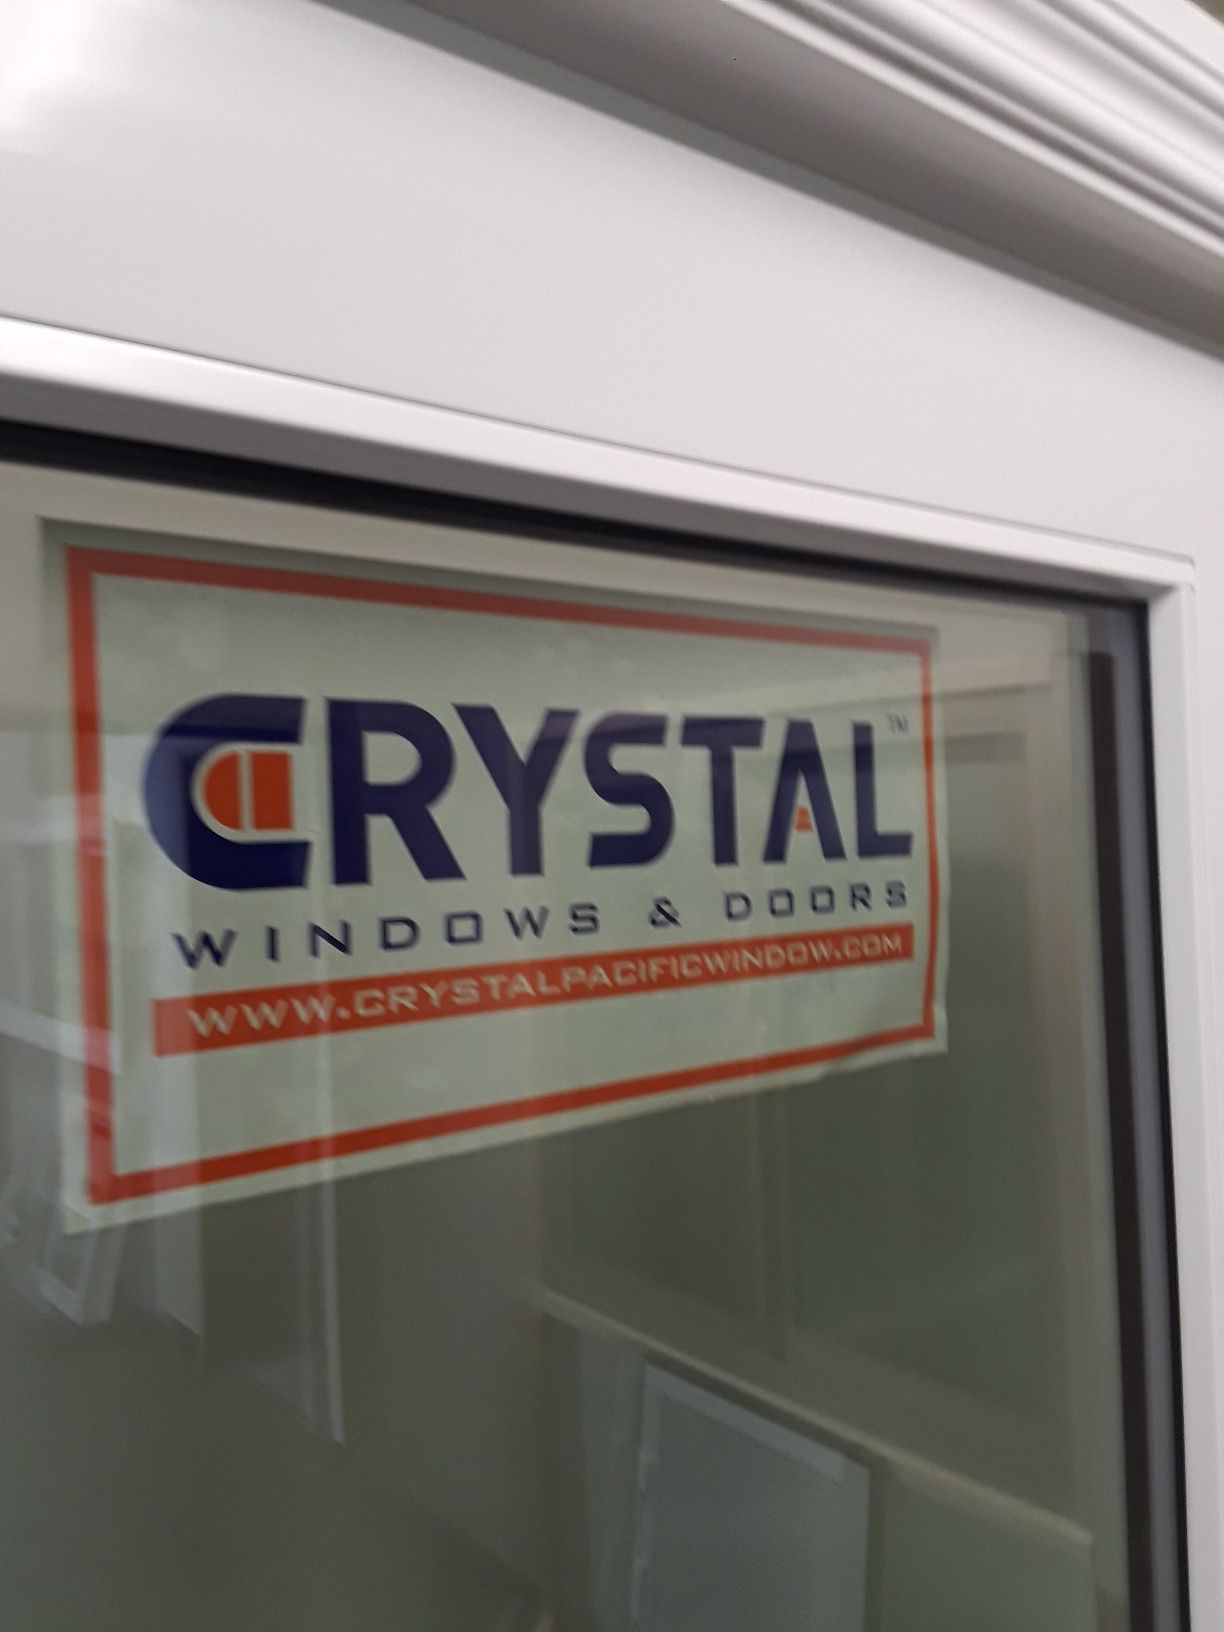 Crystal Pacific Windows, Doors, and Shutters